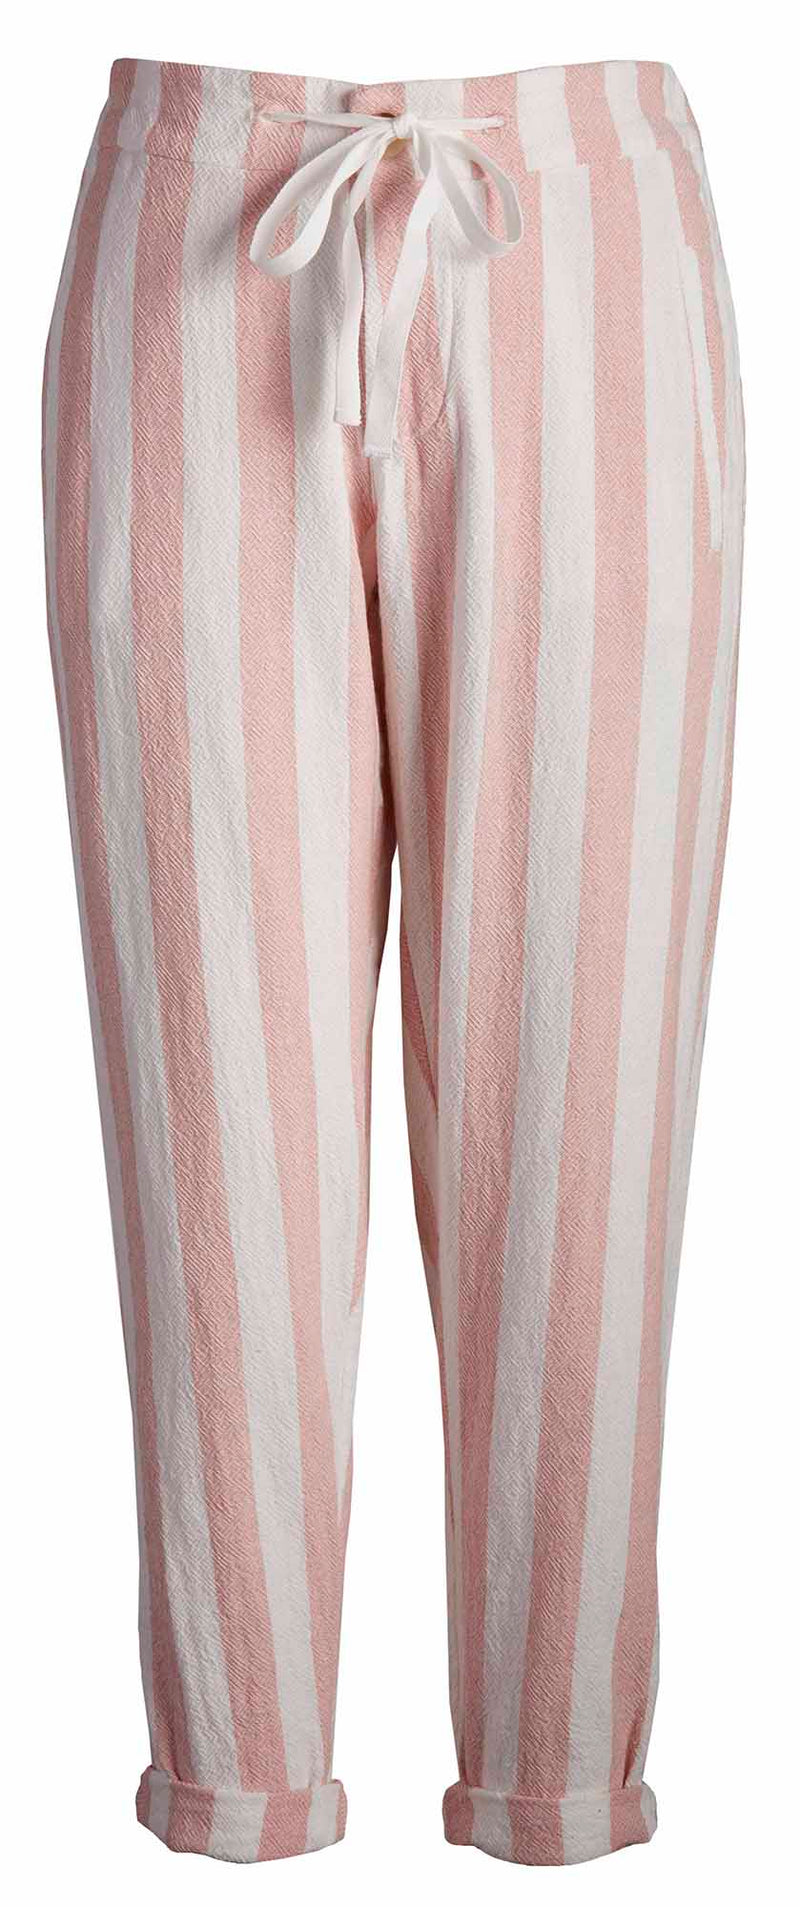 LVHR Taylor Crop Pant in pink and white stripe. Slightly cropped pant in cotton with front pockets and adjustable drawstring waistband. Front